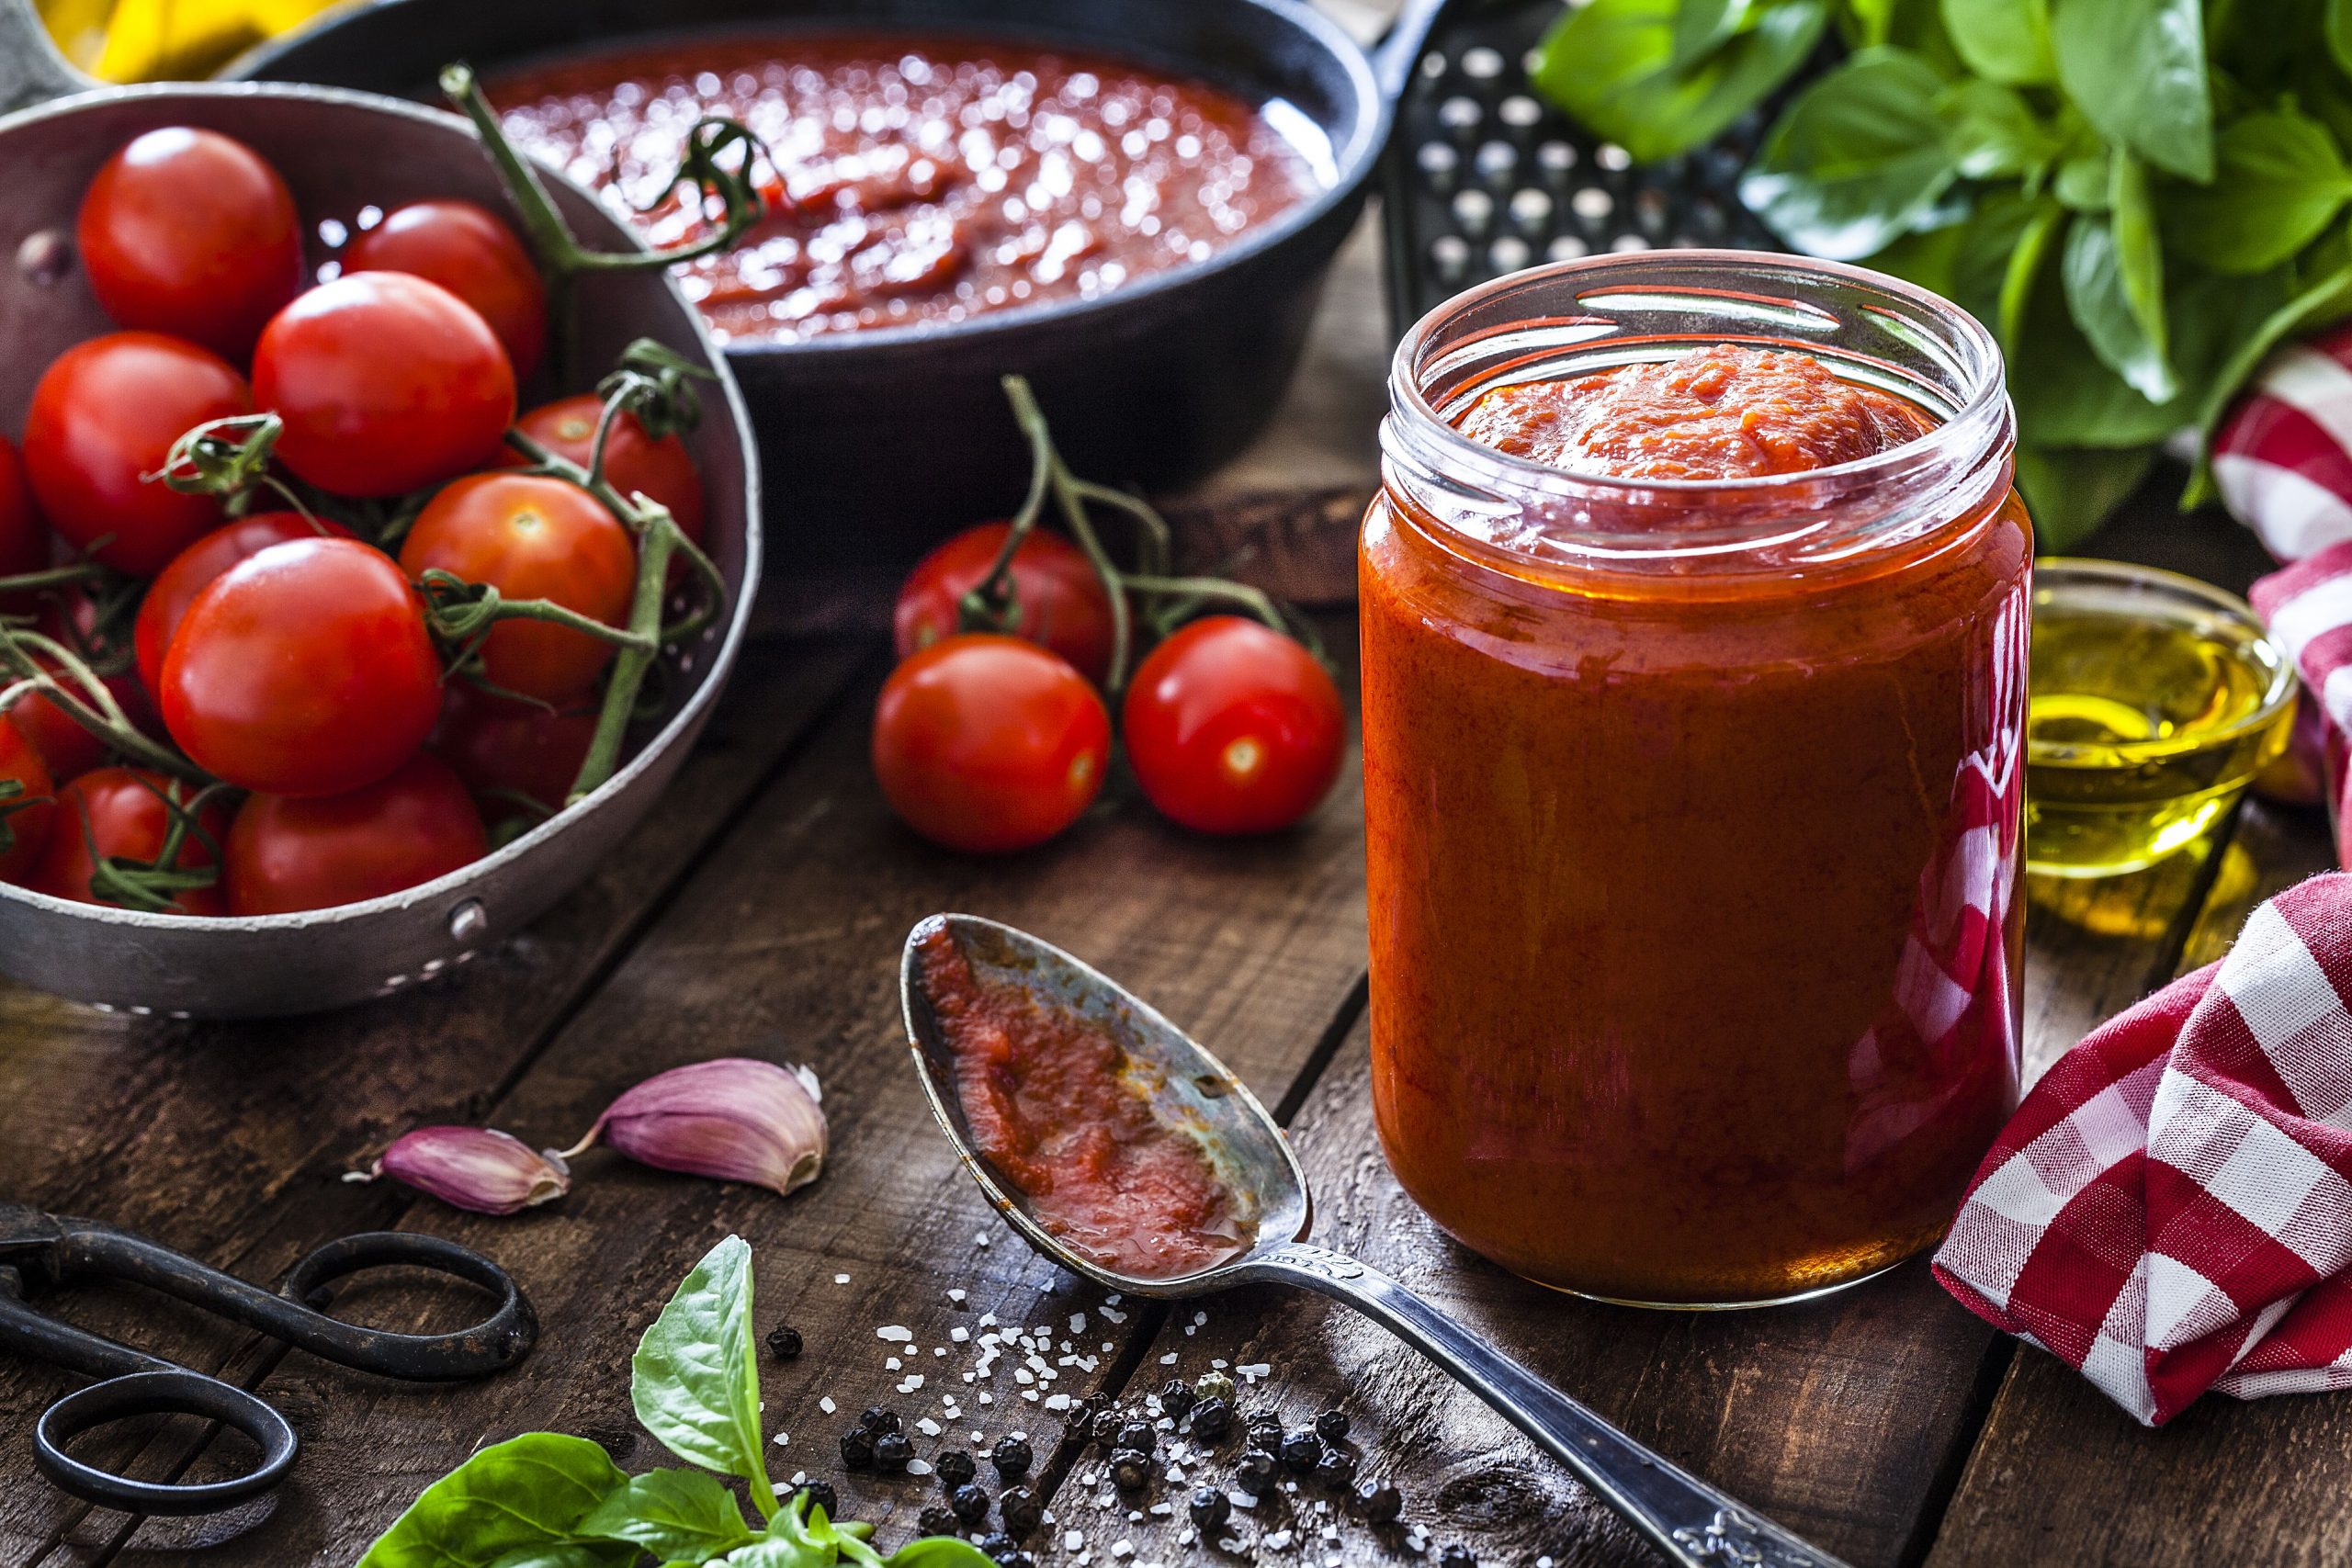 How to Make Tomato Paste at Home